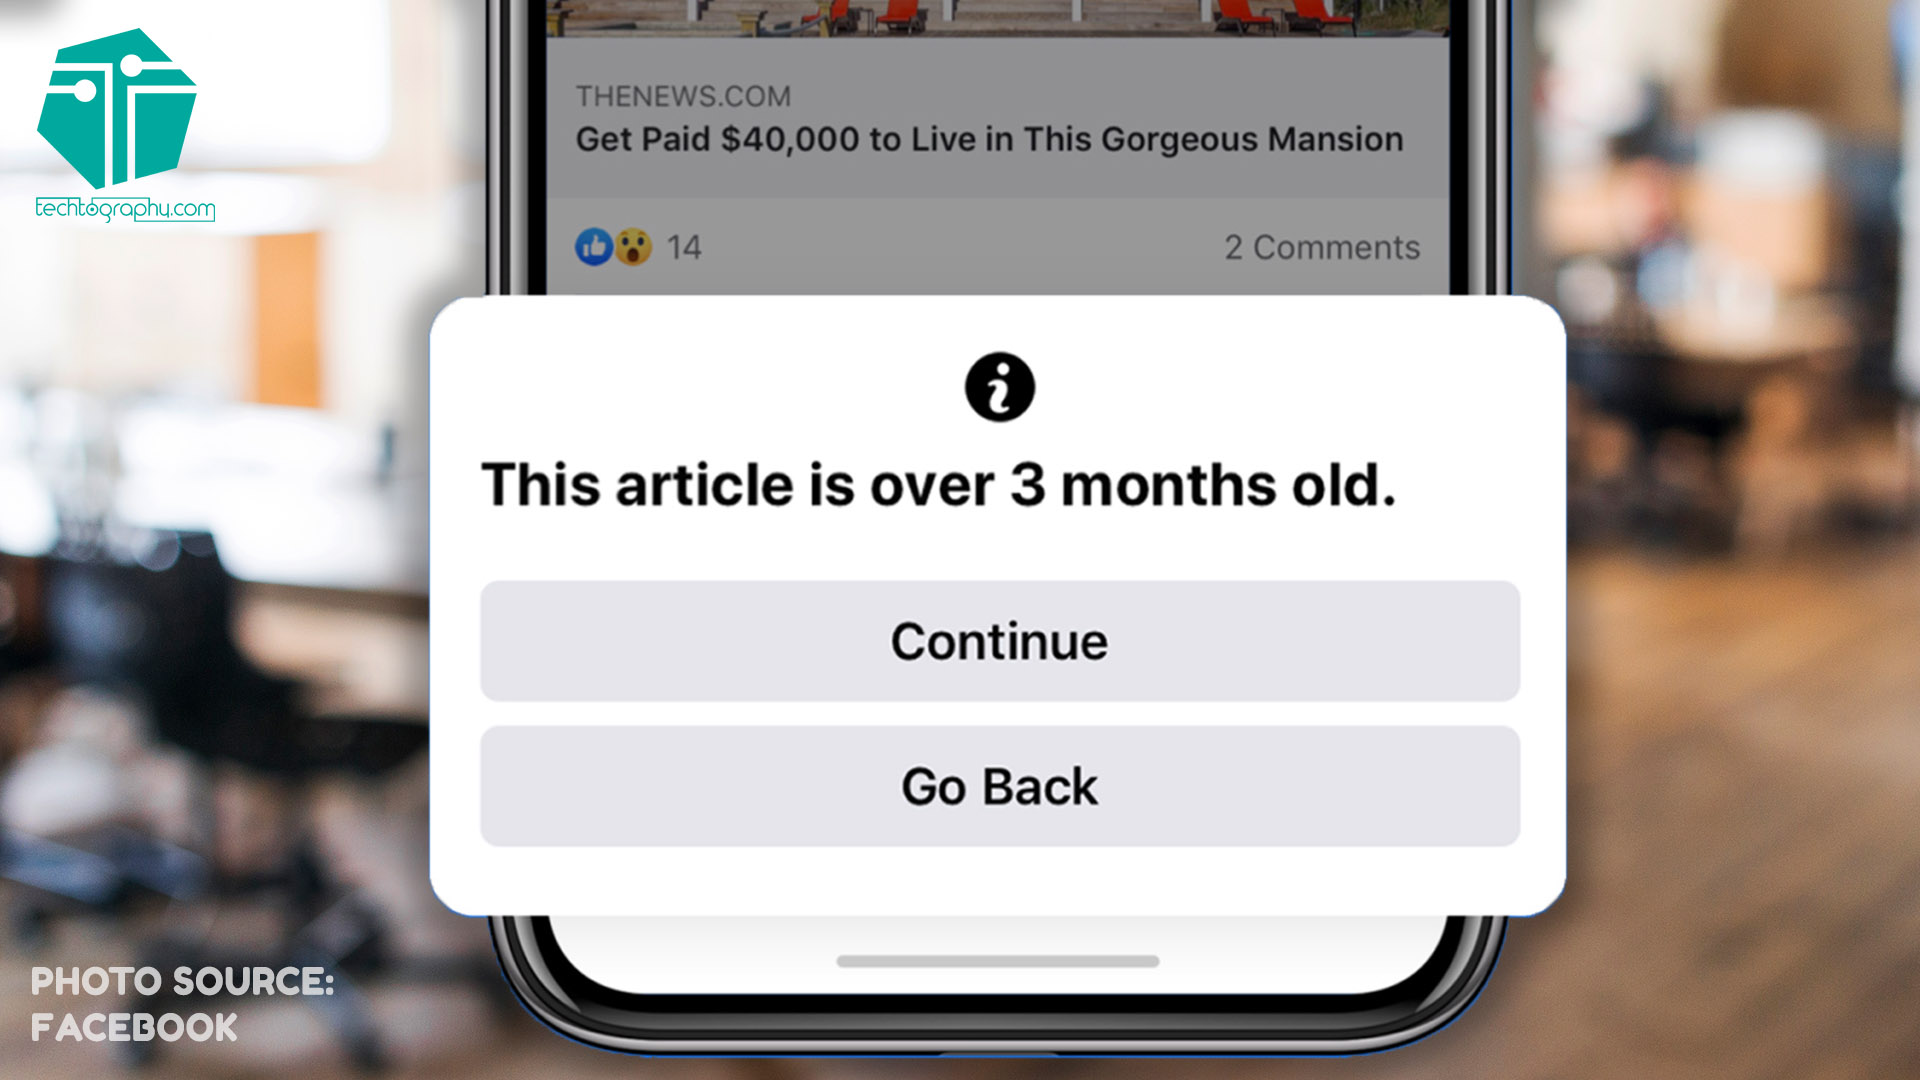 Facebook will Inform Users When They’re About to Share Old News